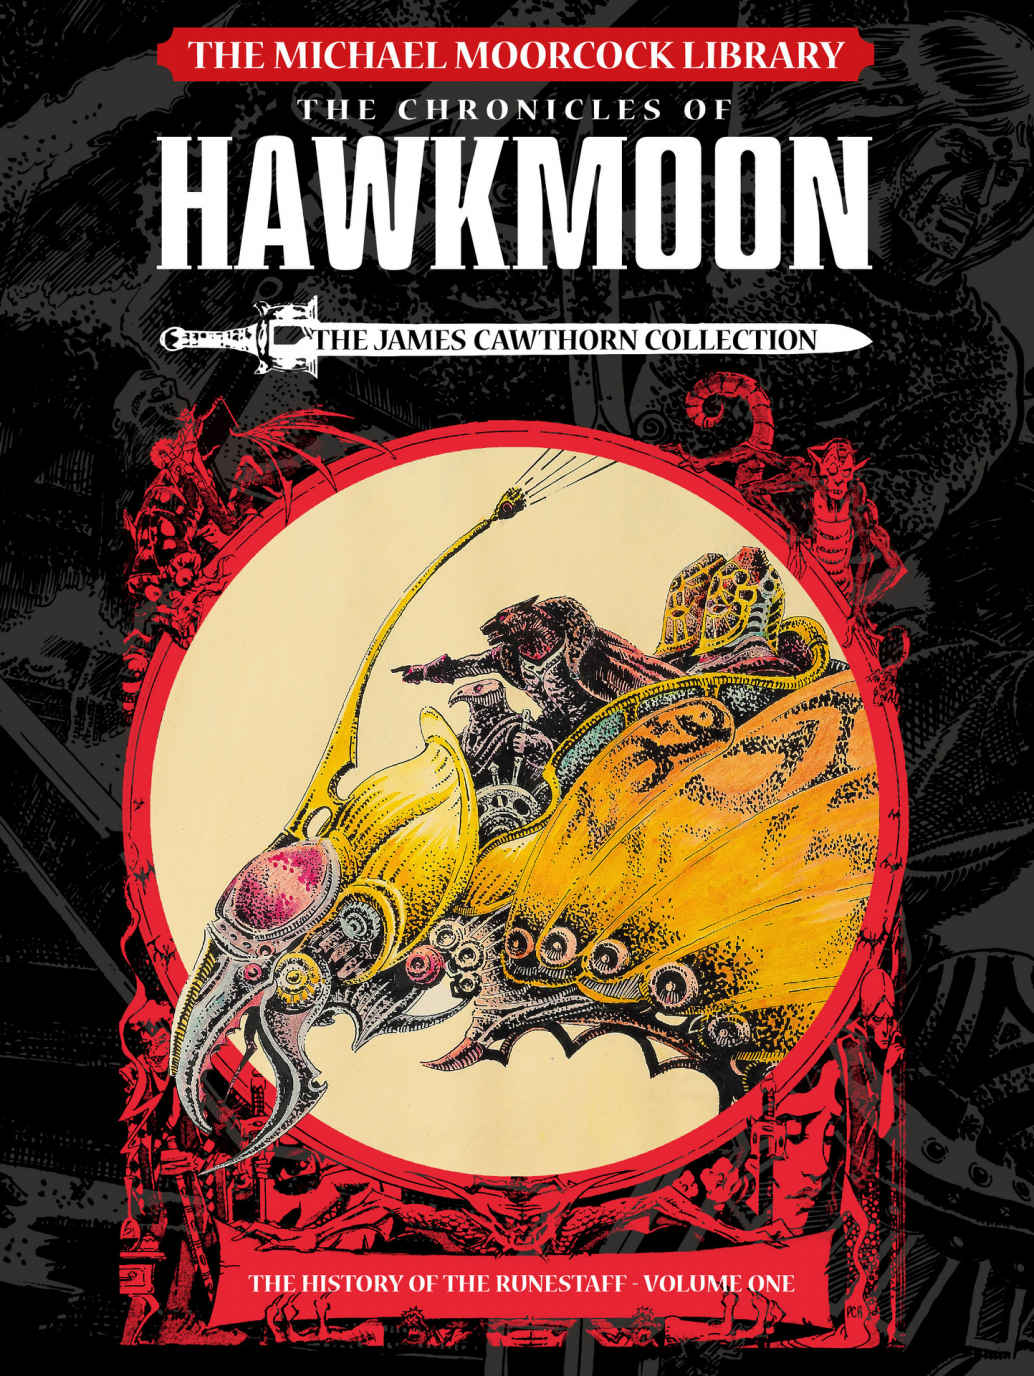 The Michael Moorcock Library: Hawkmoon | Michael Moorcock, James Cawthorn